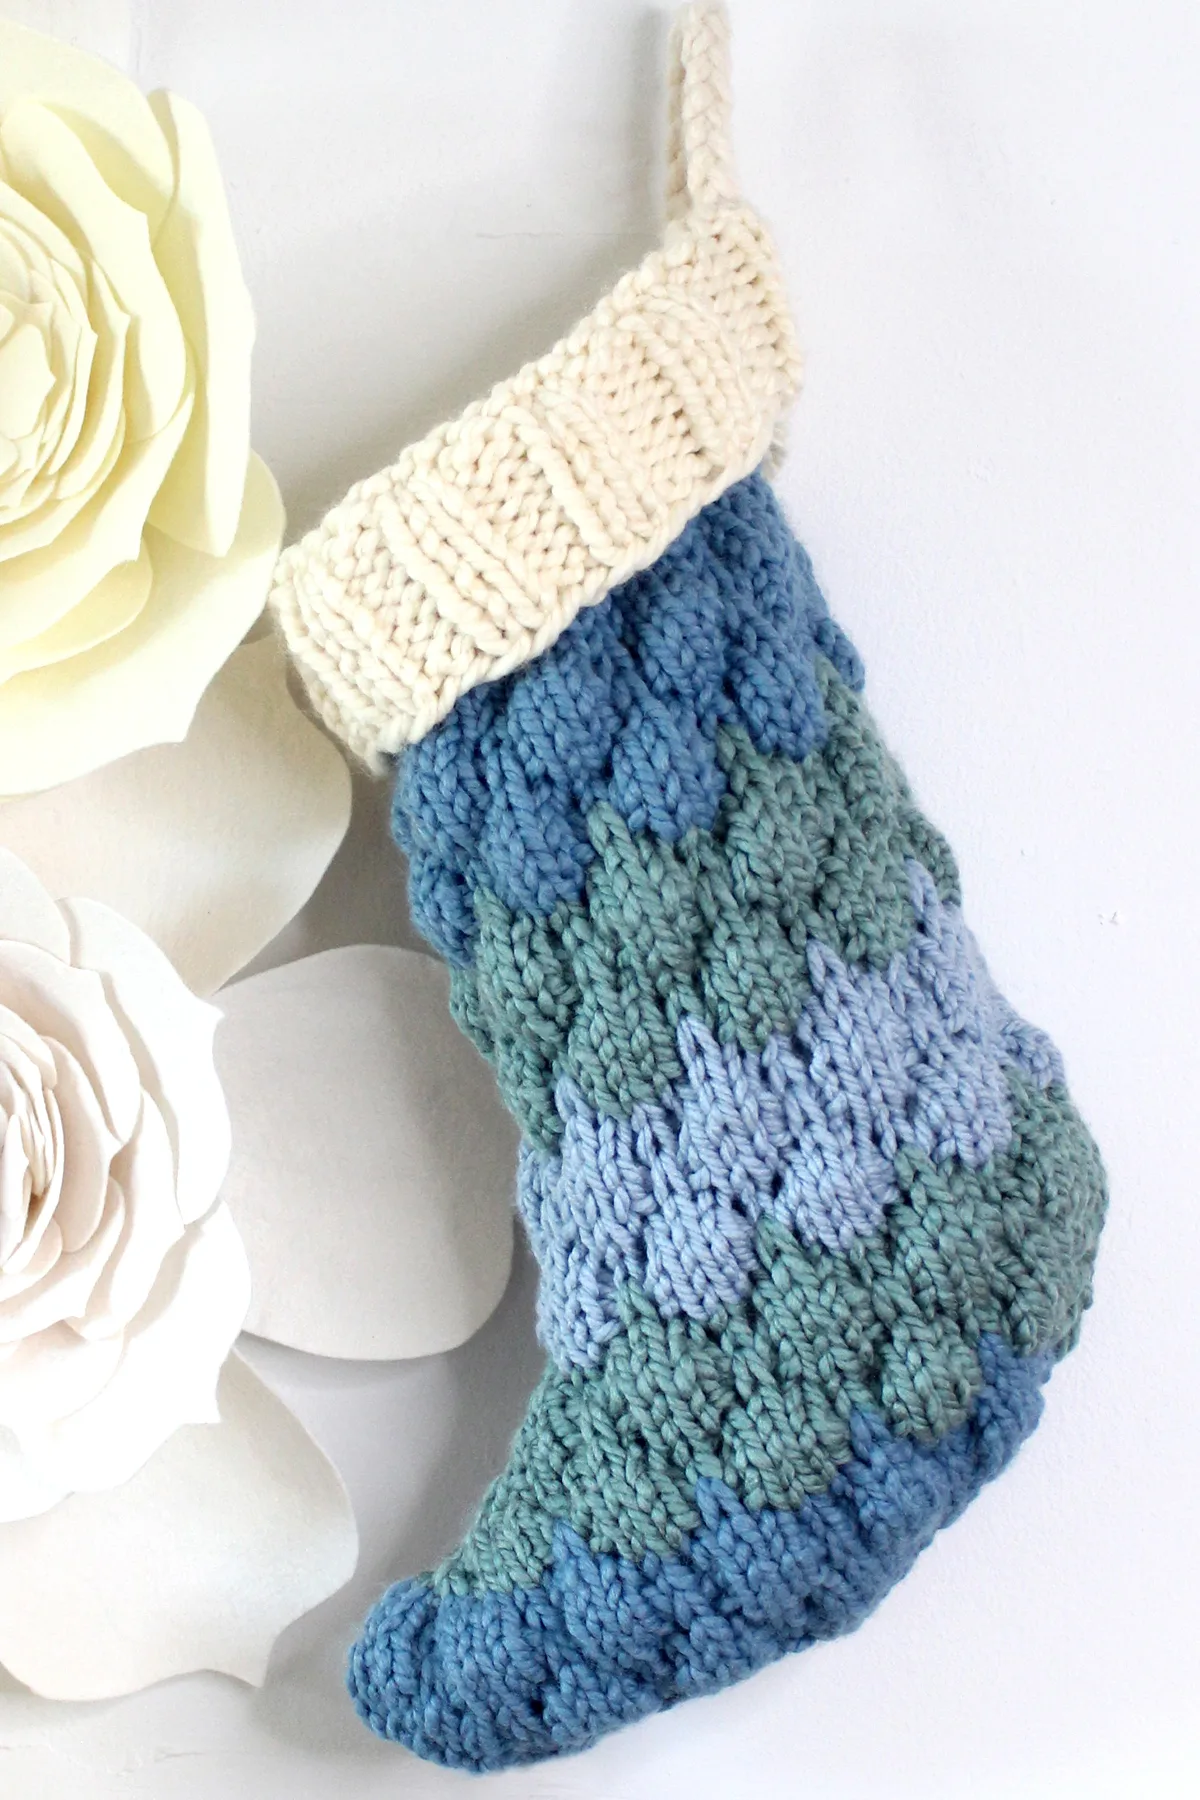 Knitted Bubble Stocking with three shades of blue yarn and a cream color cuff.